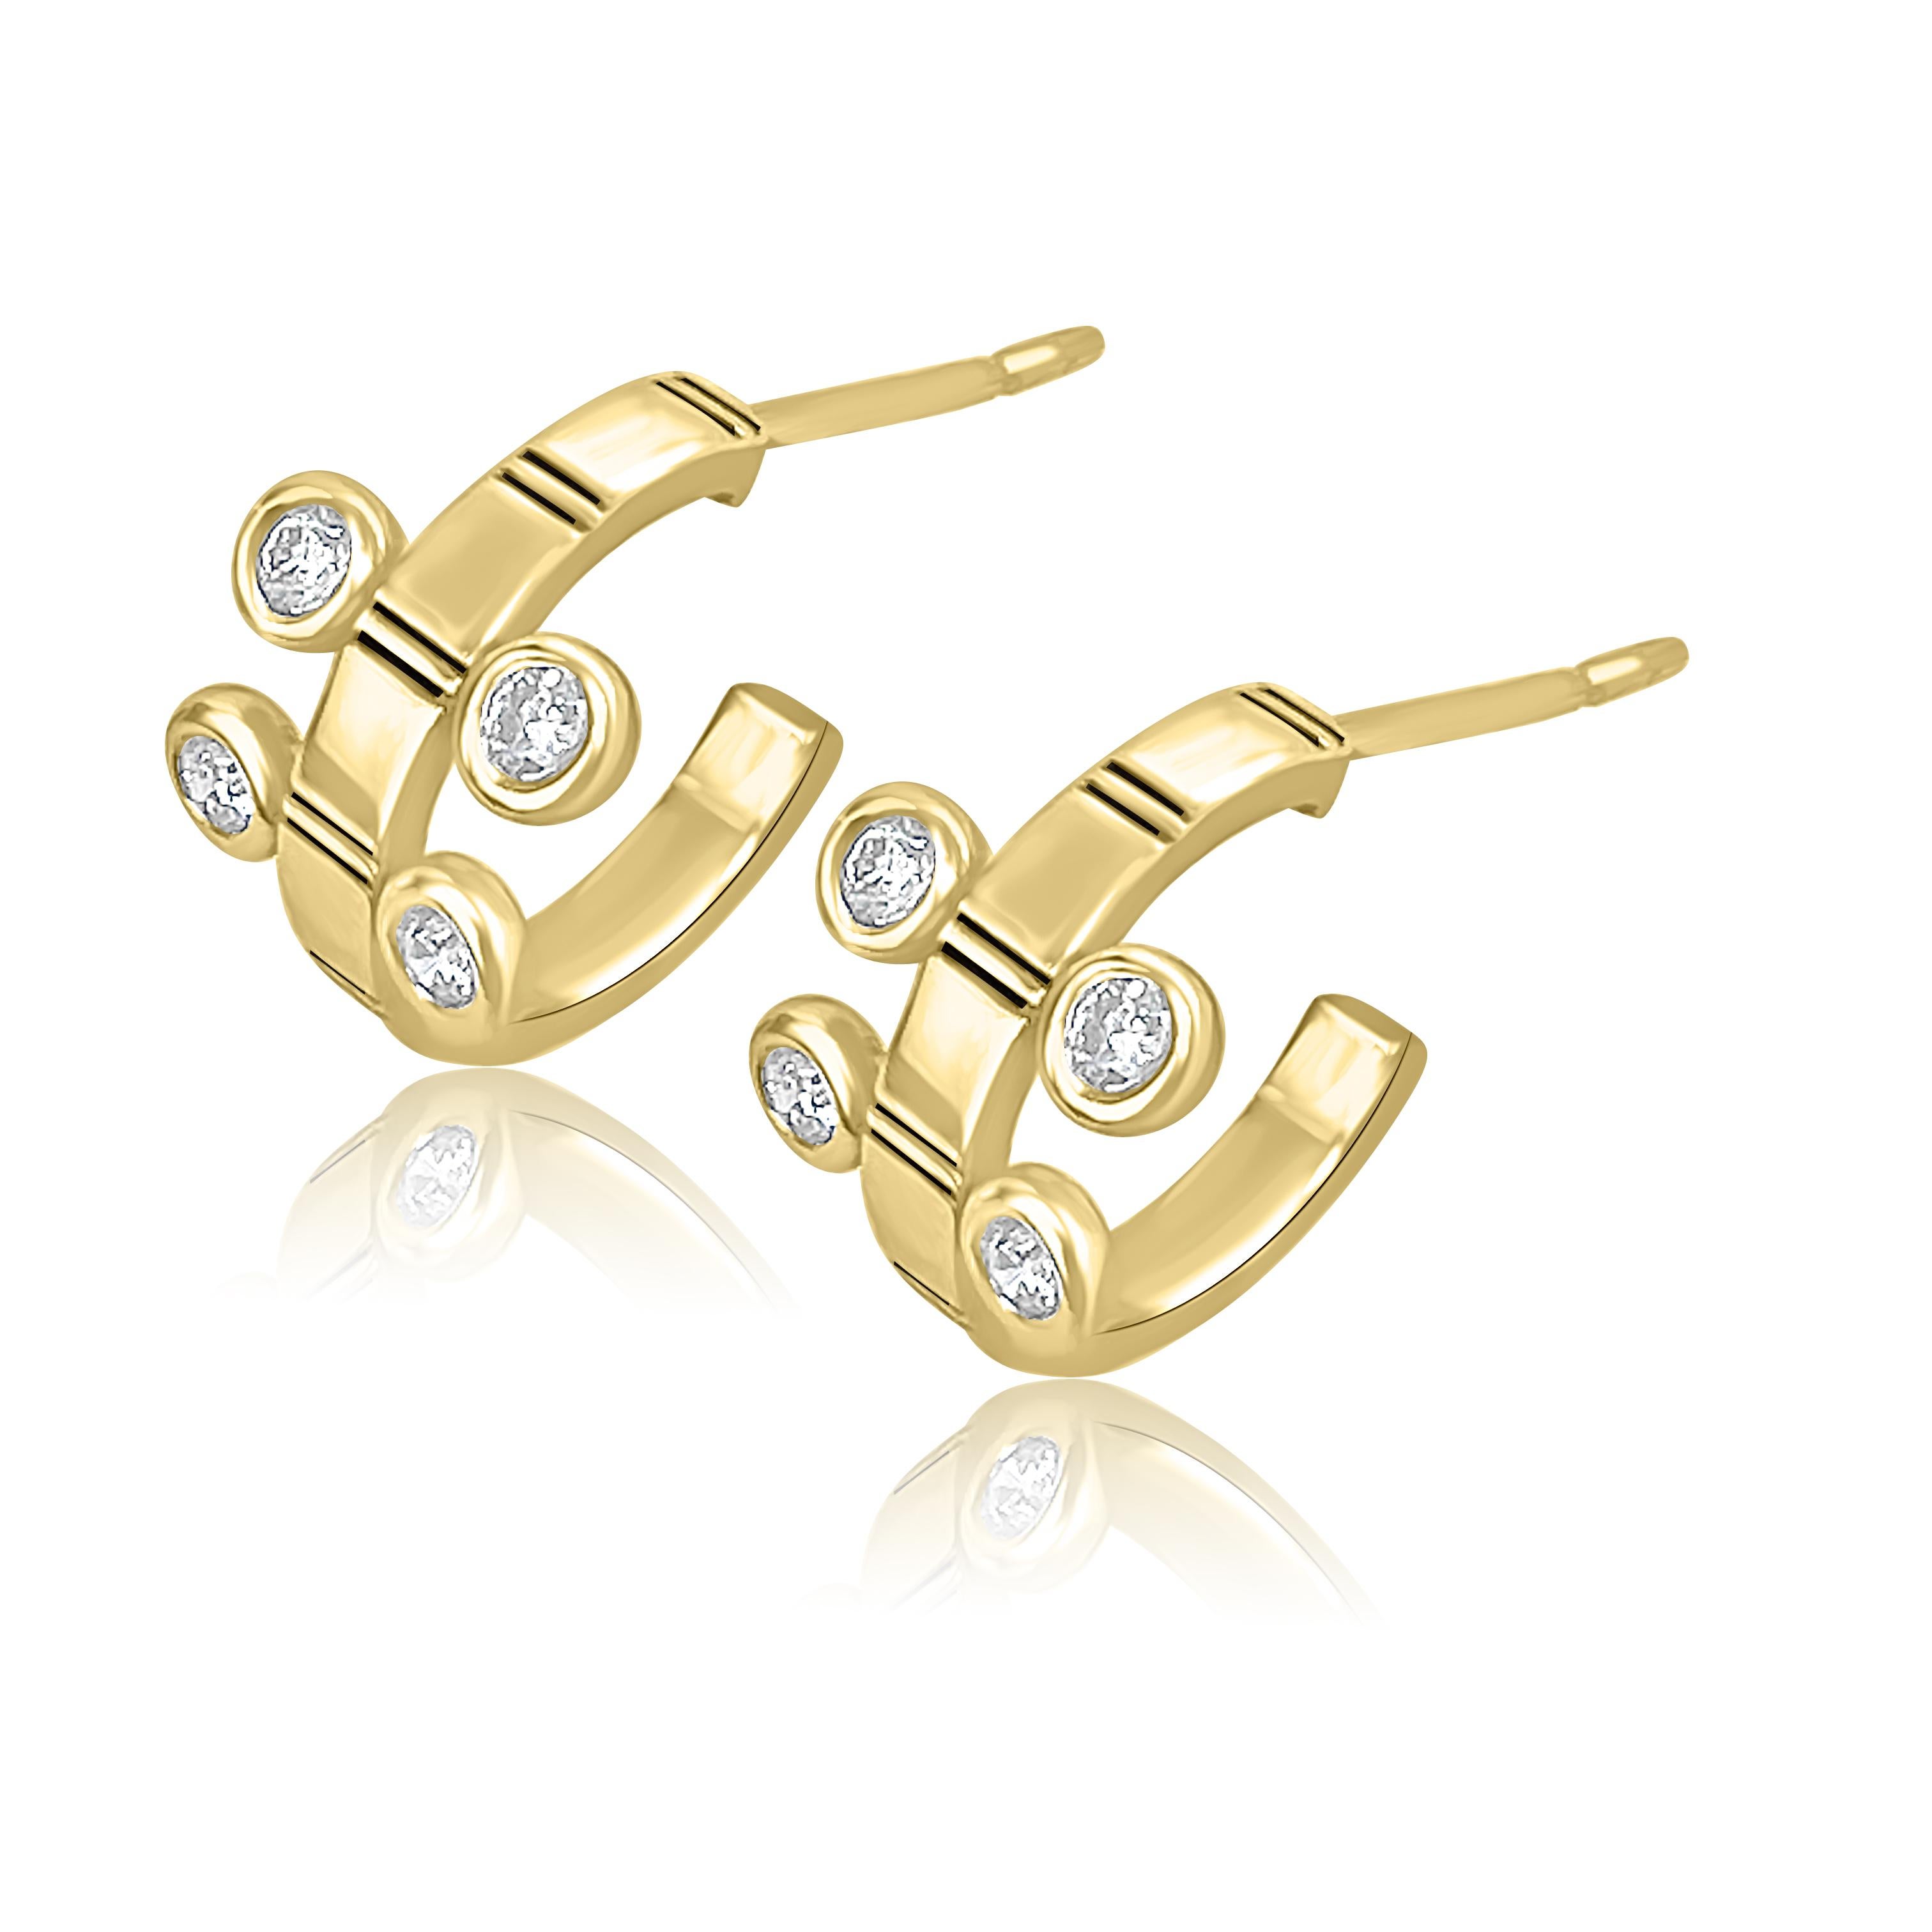 
Part of the New Vintage collection, these earrings are the perfect match for the modern woman: luxurious, distinctive, and versatile.

Handcrafted from 14 karat solid yellow gold, these earrings feature 4 bezel-set sparkling diamonds and repetitive